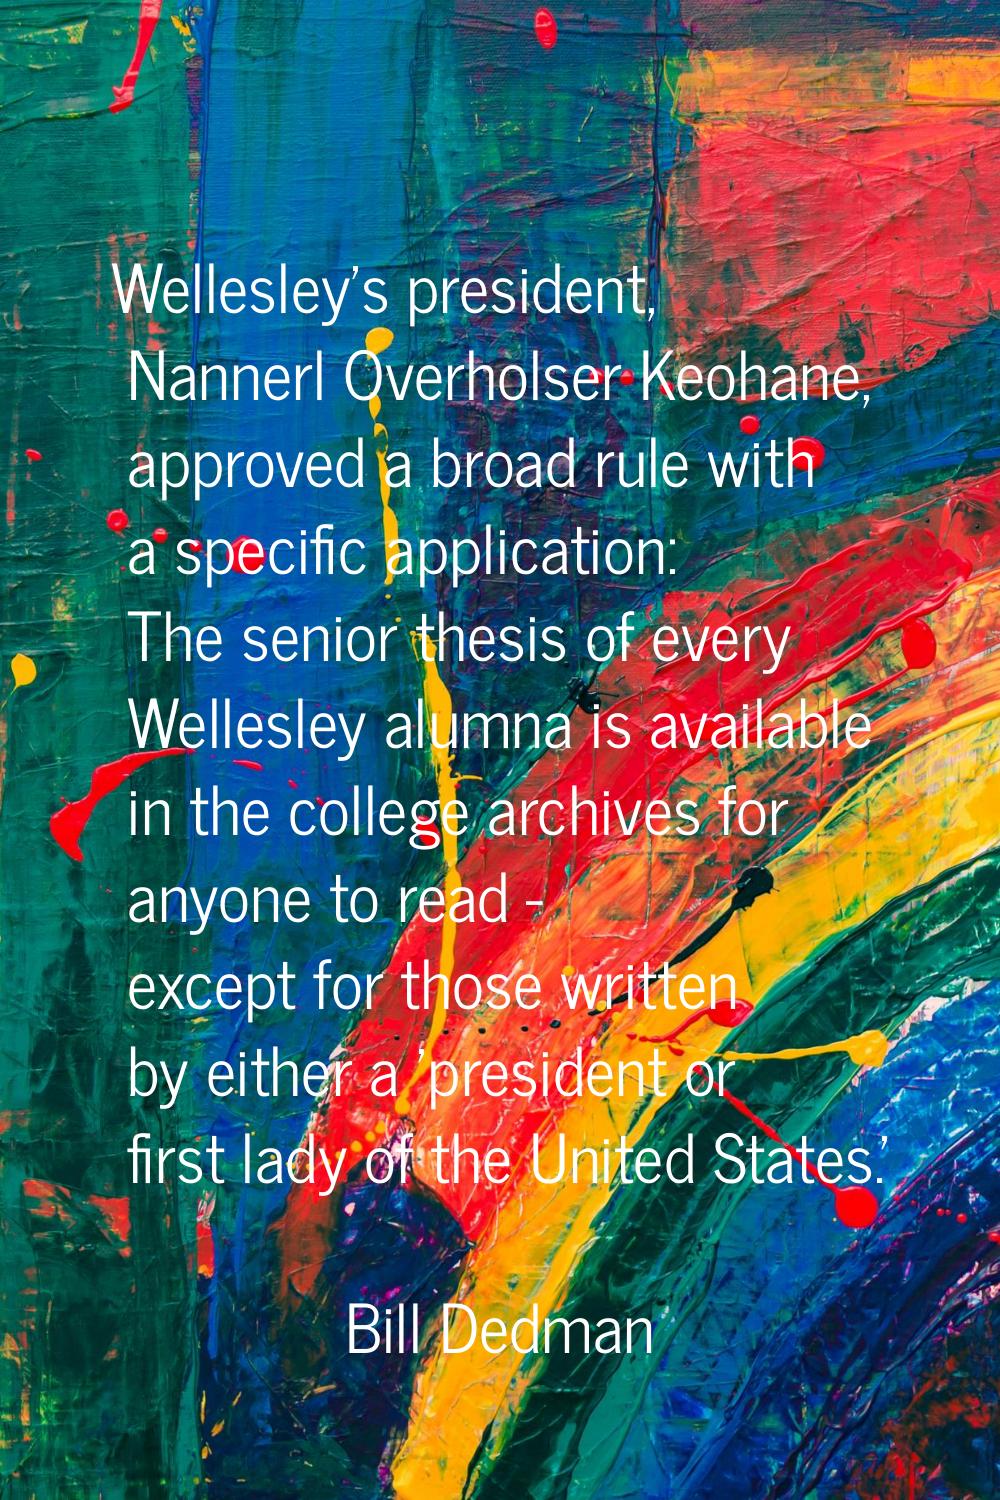 Wellesley's president, Nannerl Overholser Keohane, approved a broad rule with a specific applicatio